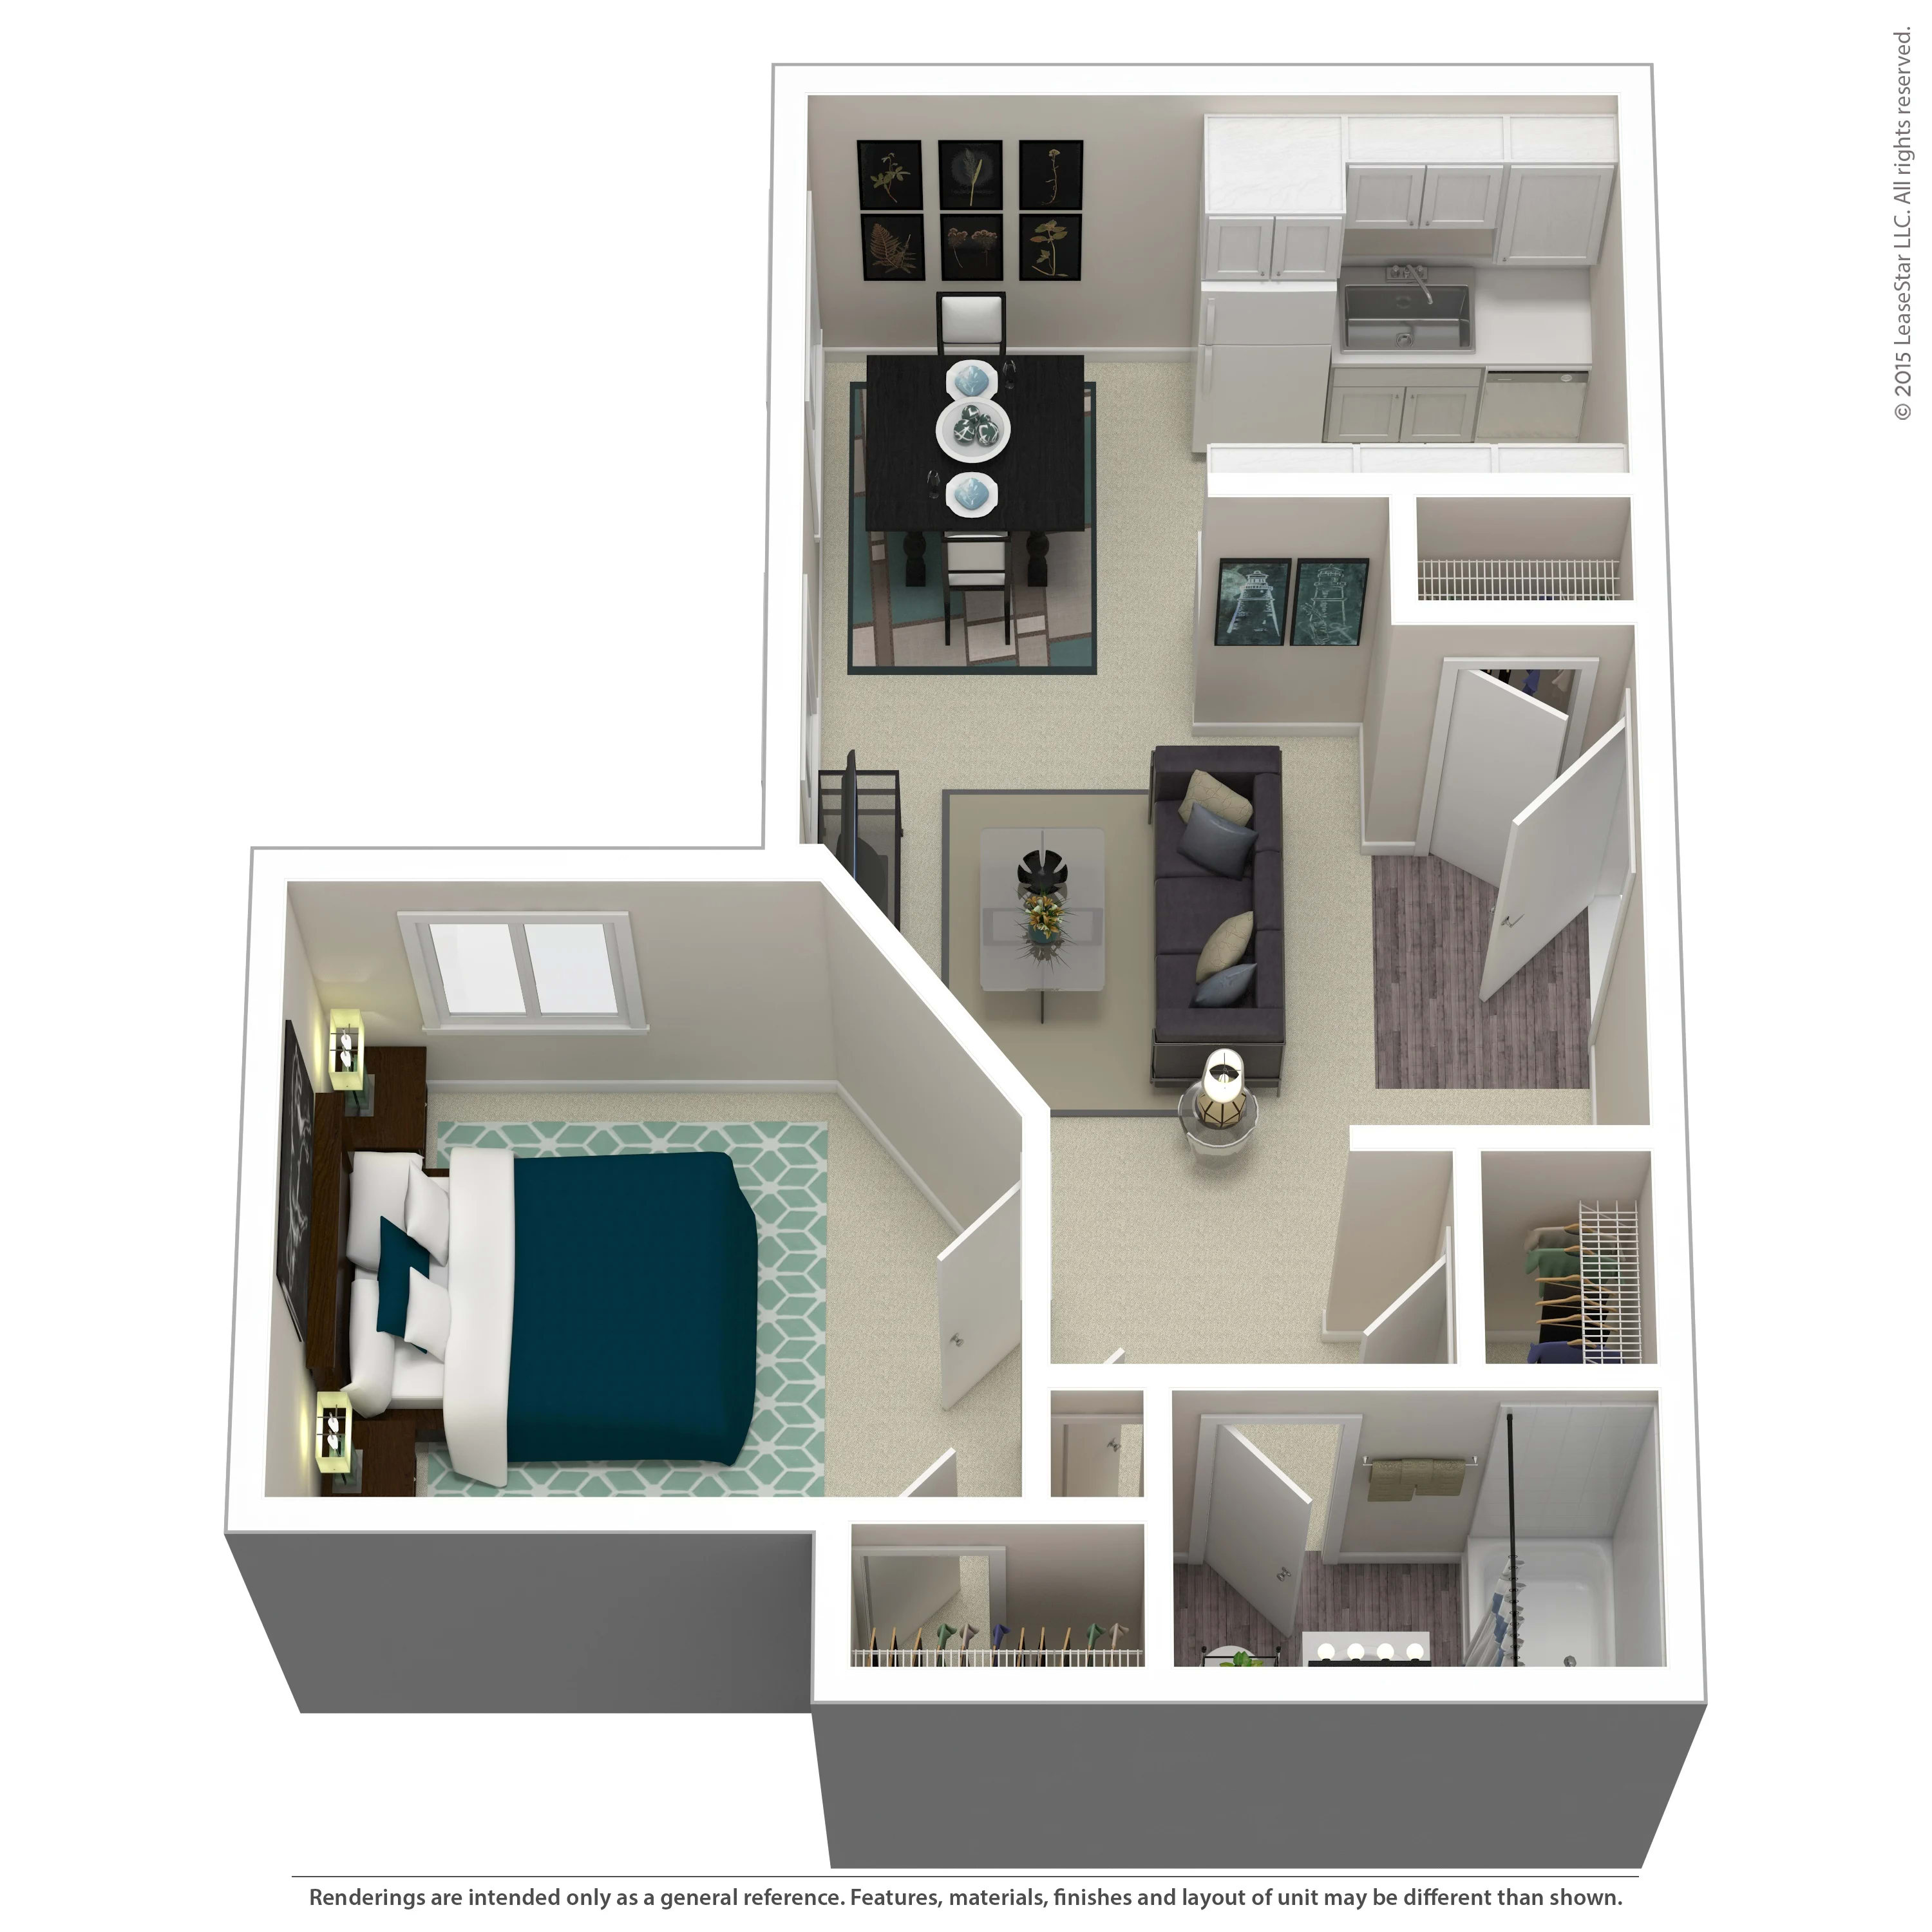 RESIDENCE 3 UPGRADED, 1 BED 1 BATH, 565 Square feet